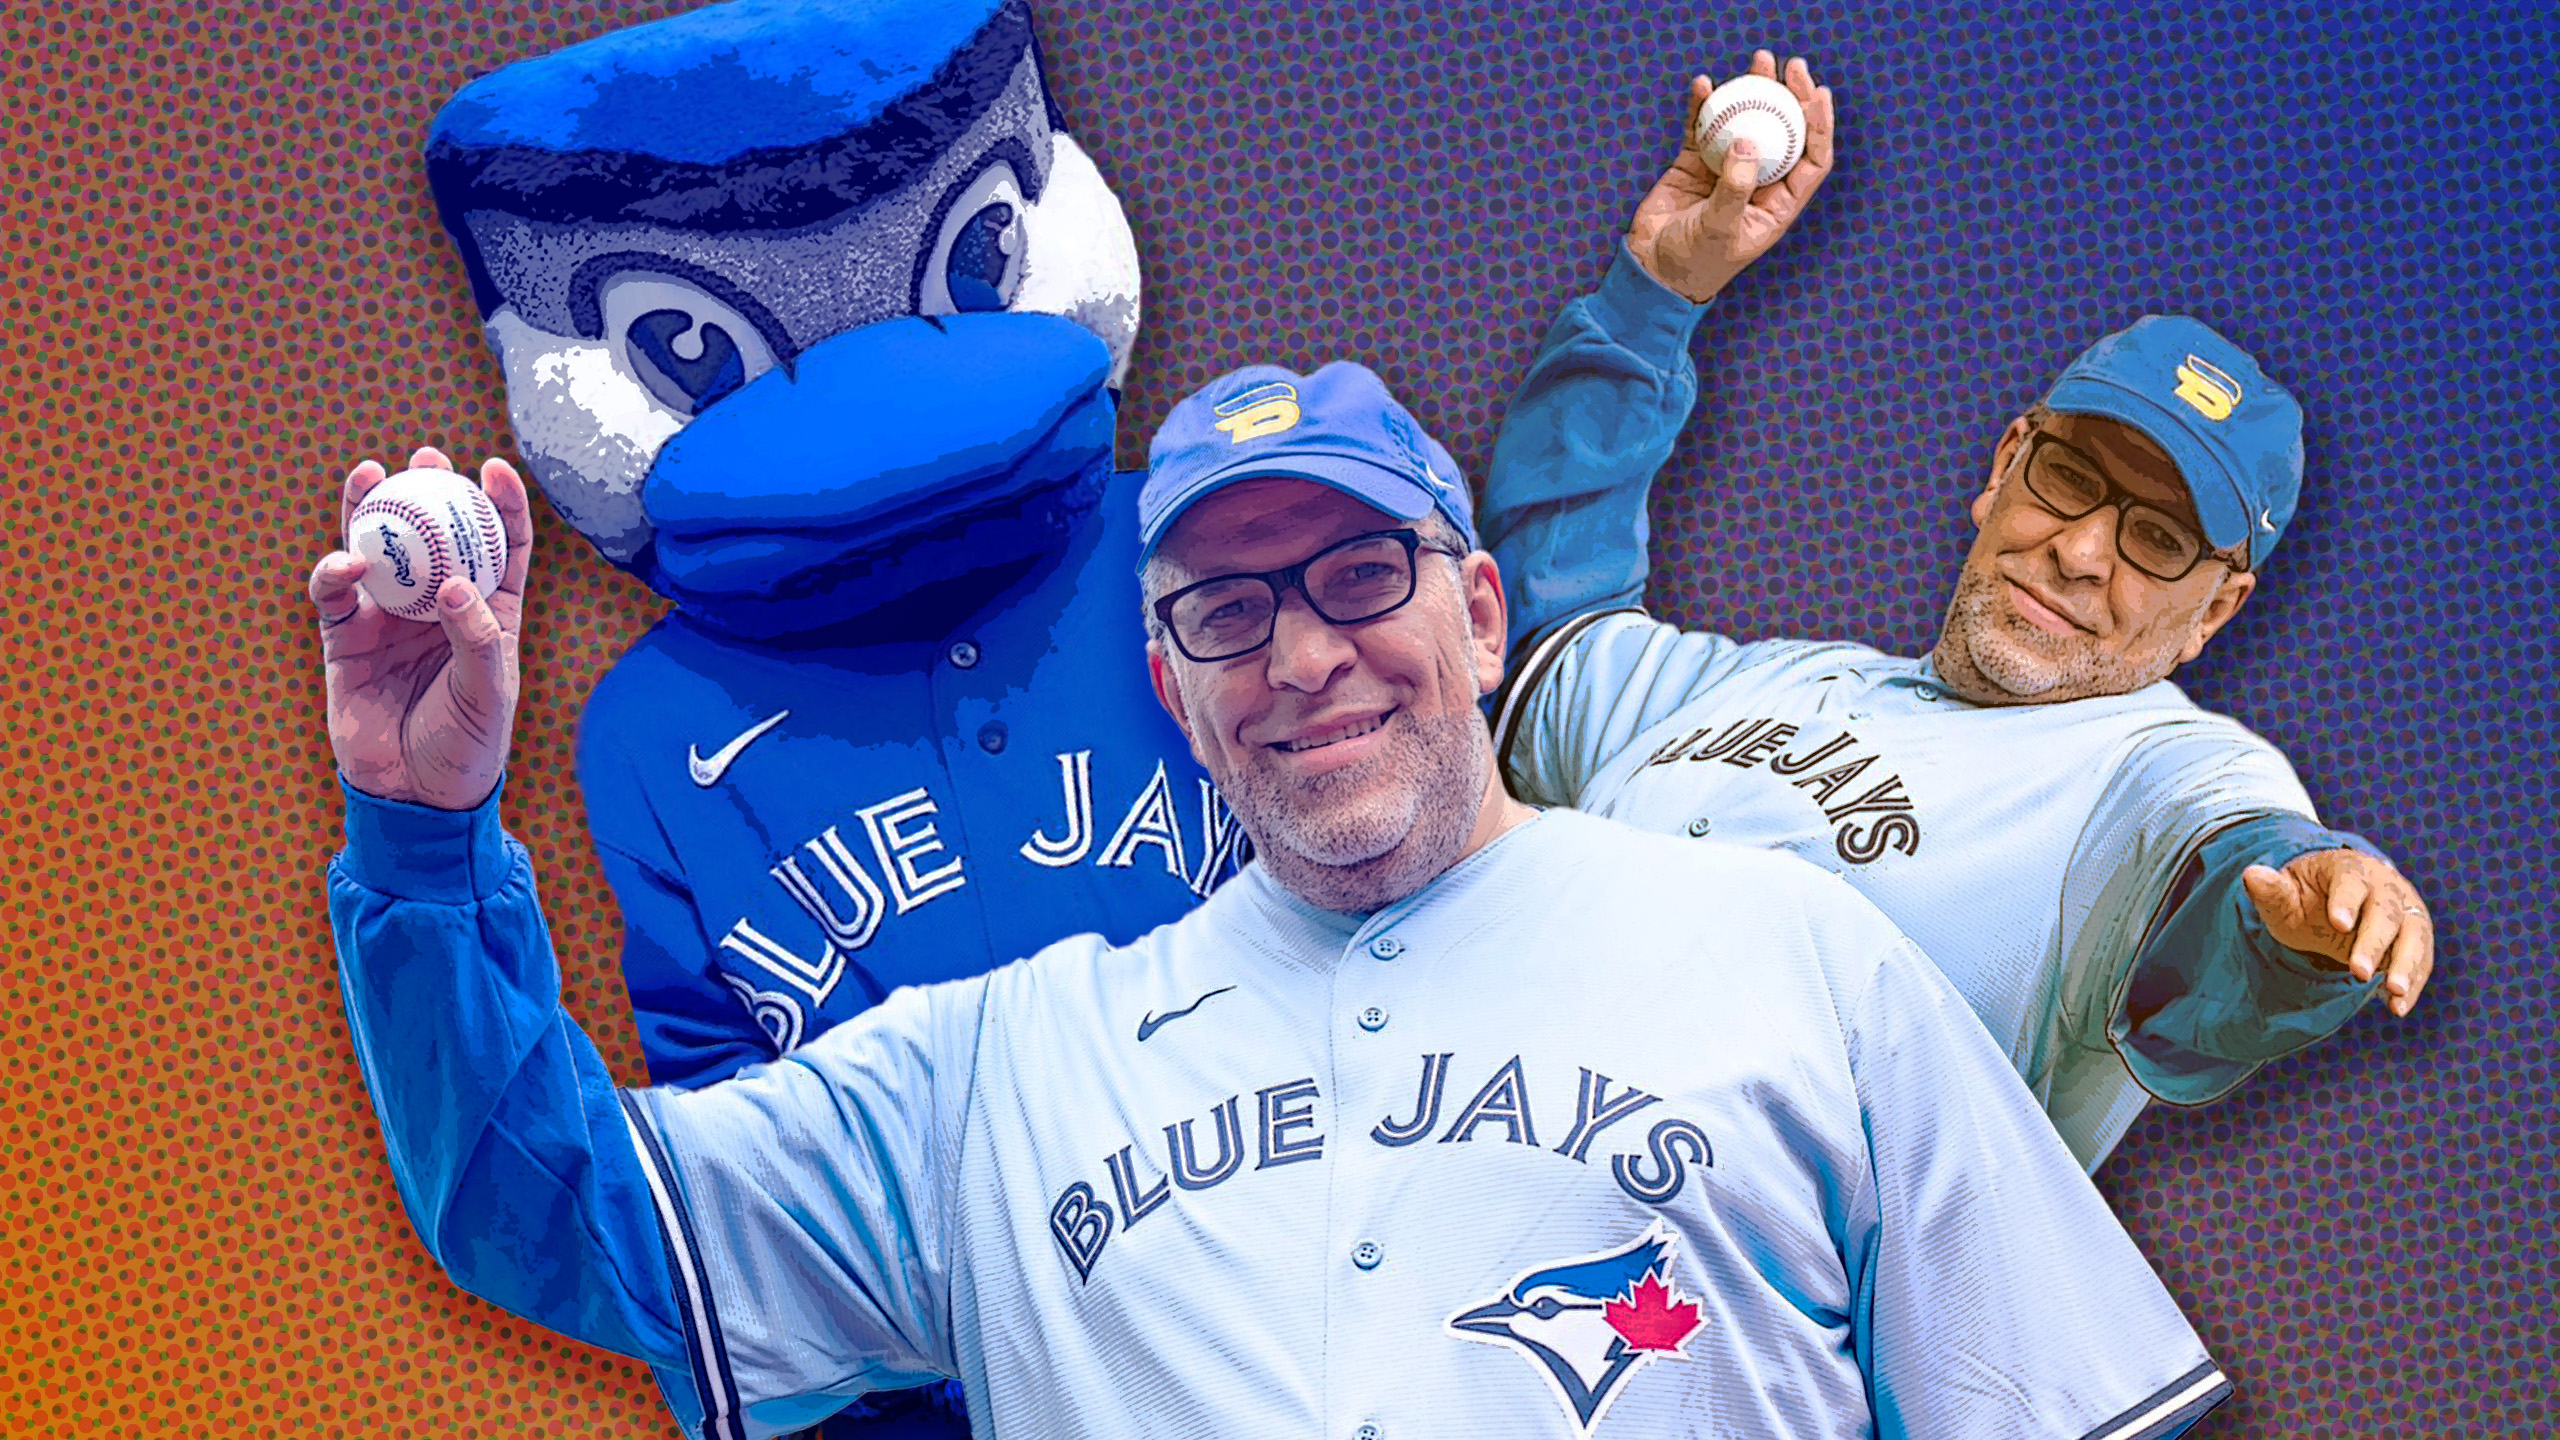 Sports mascot controversy breaks loose after Lachemi throws first pitch at  Jays' game – The Eyeopener